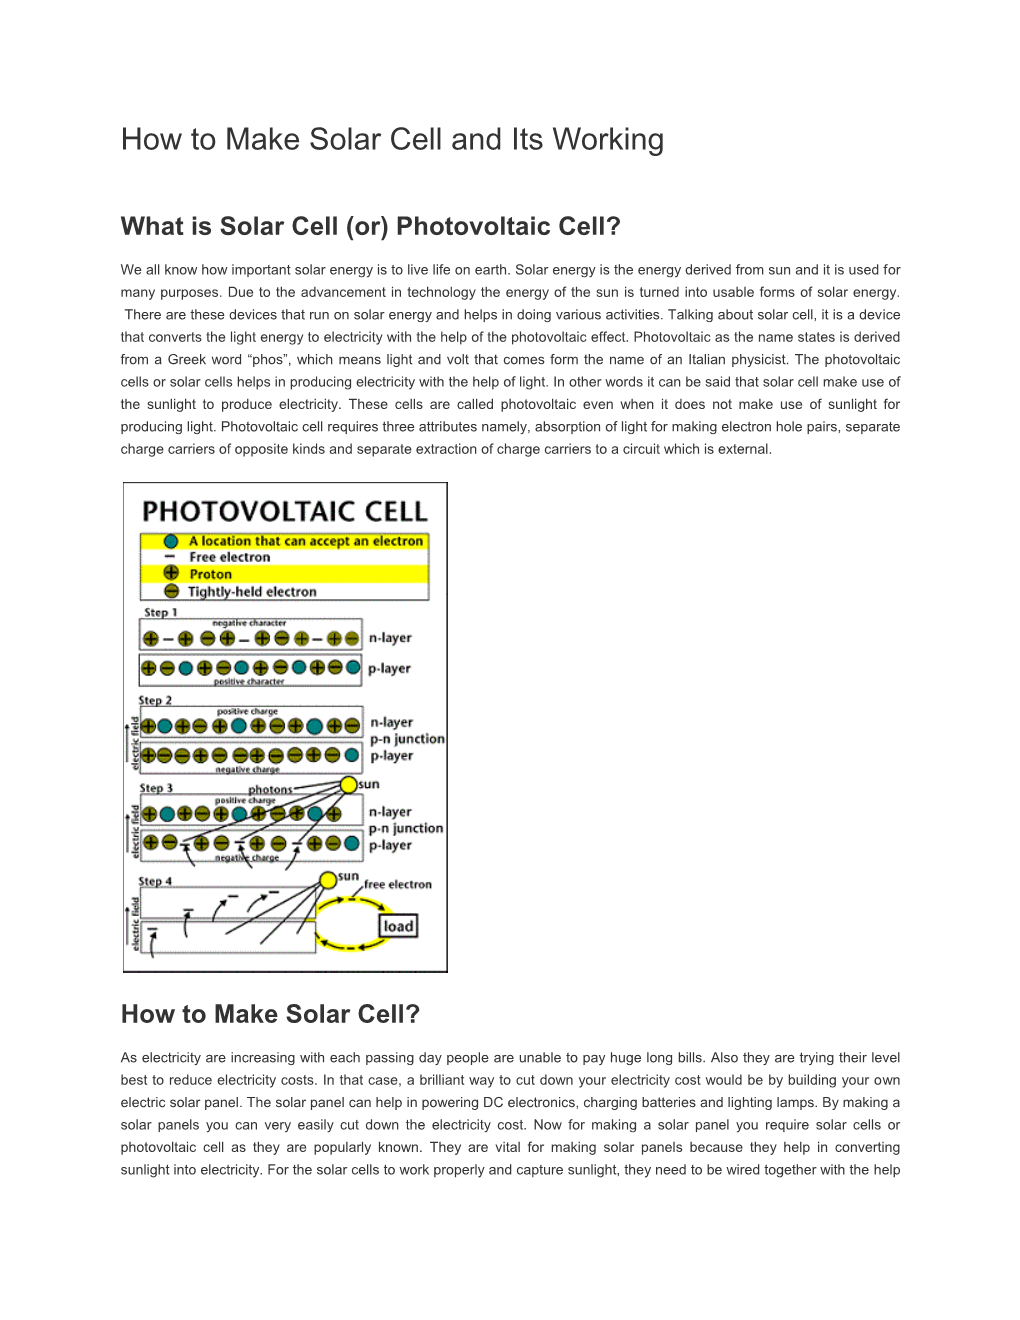 How to Make Solar Cell and Its Working